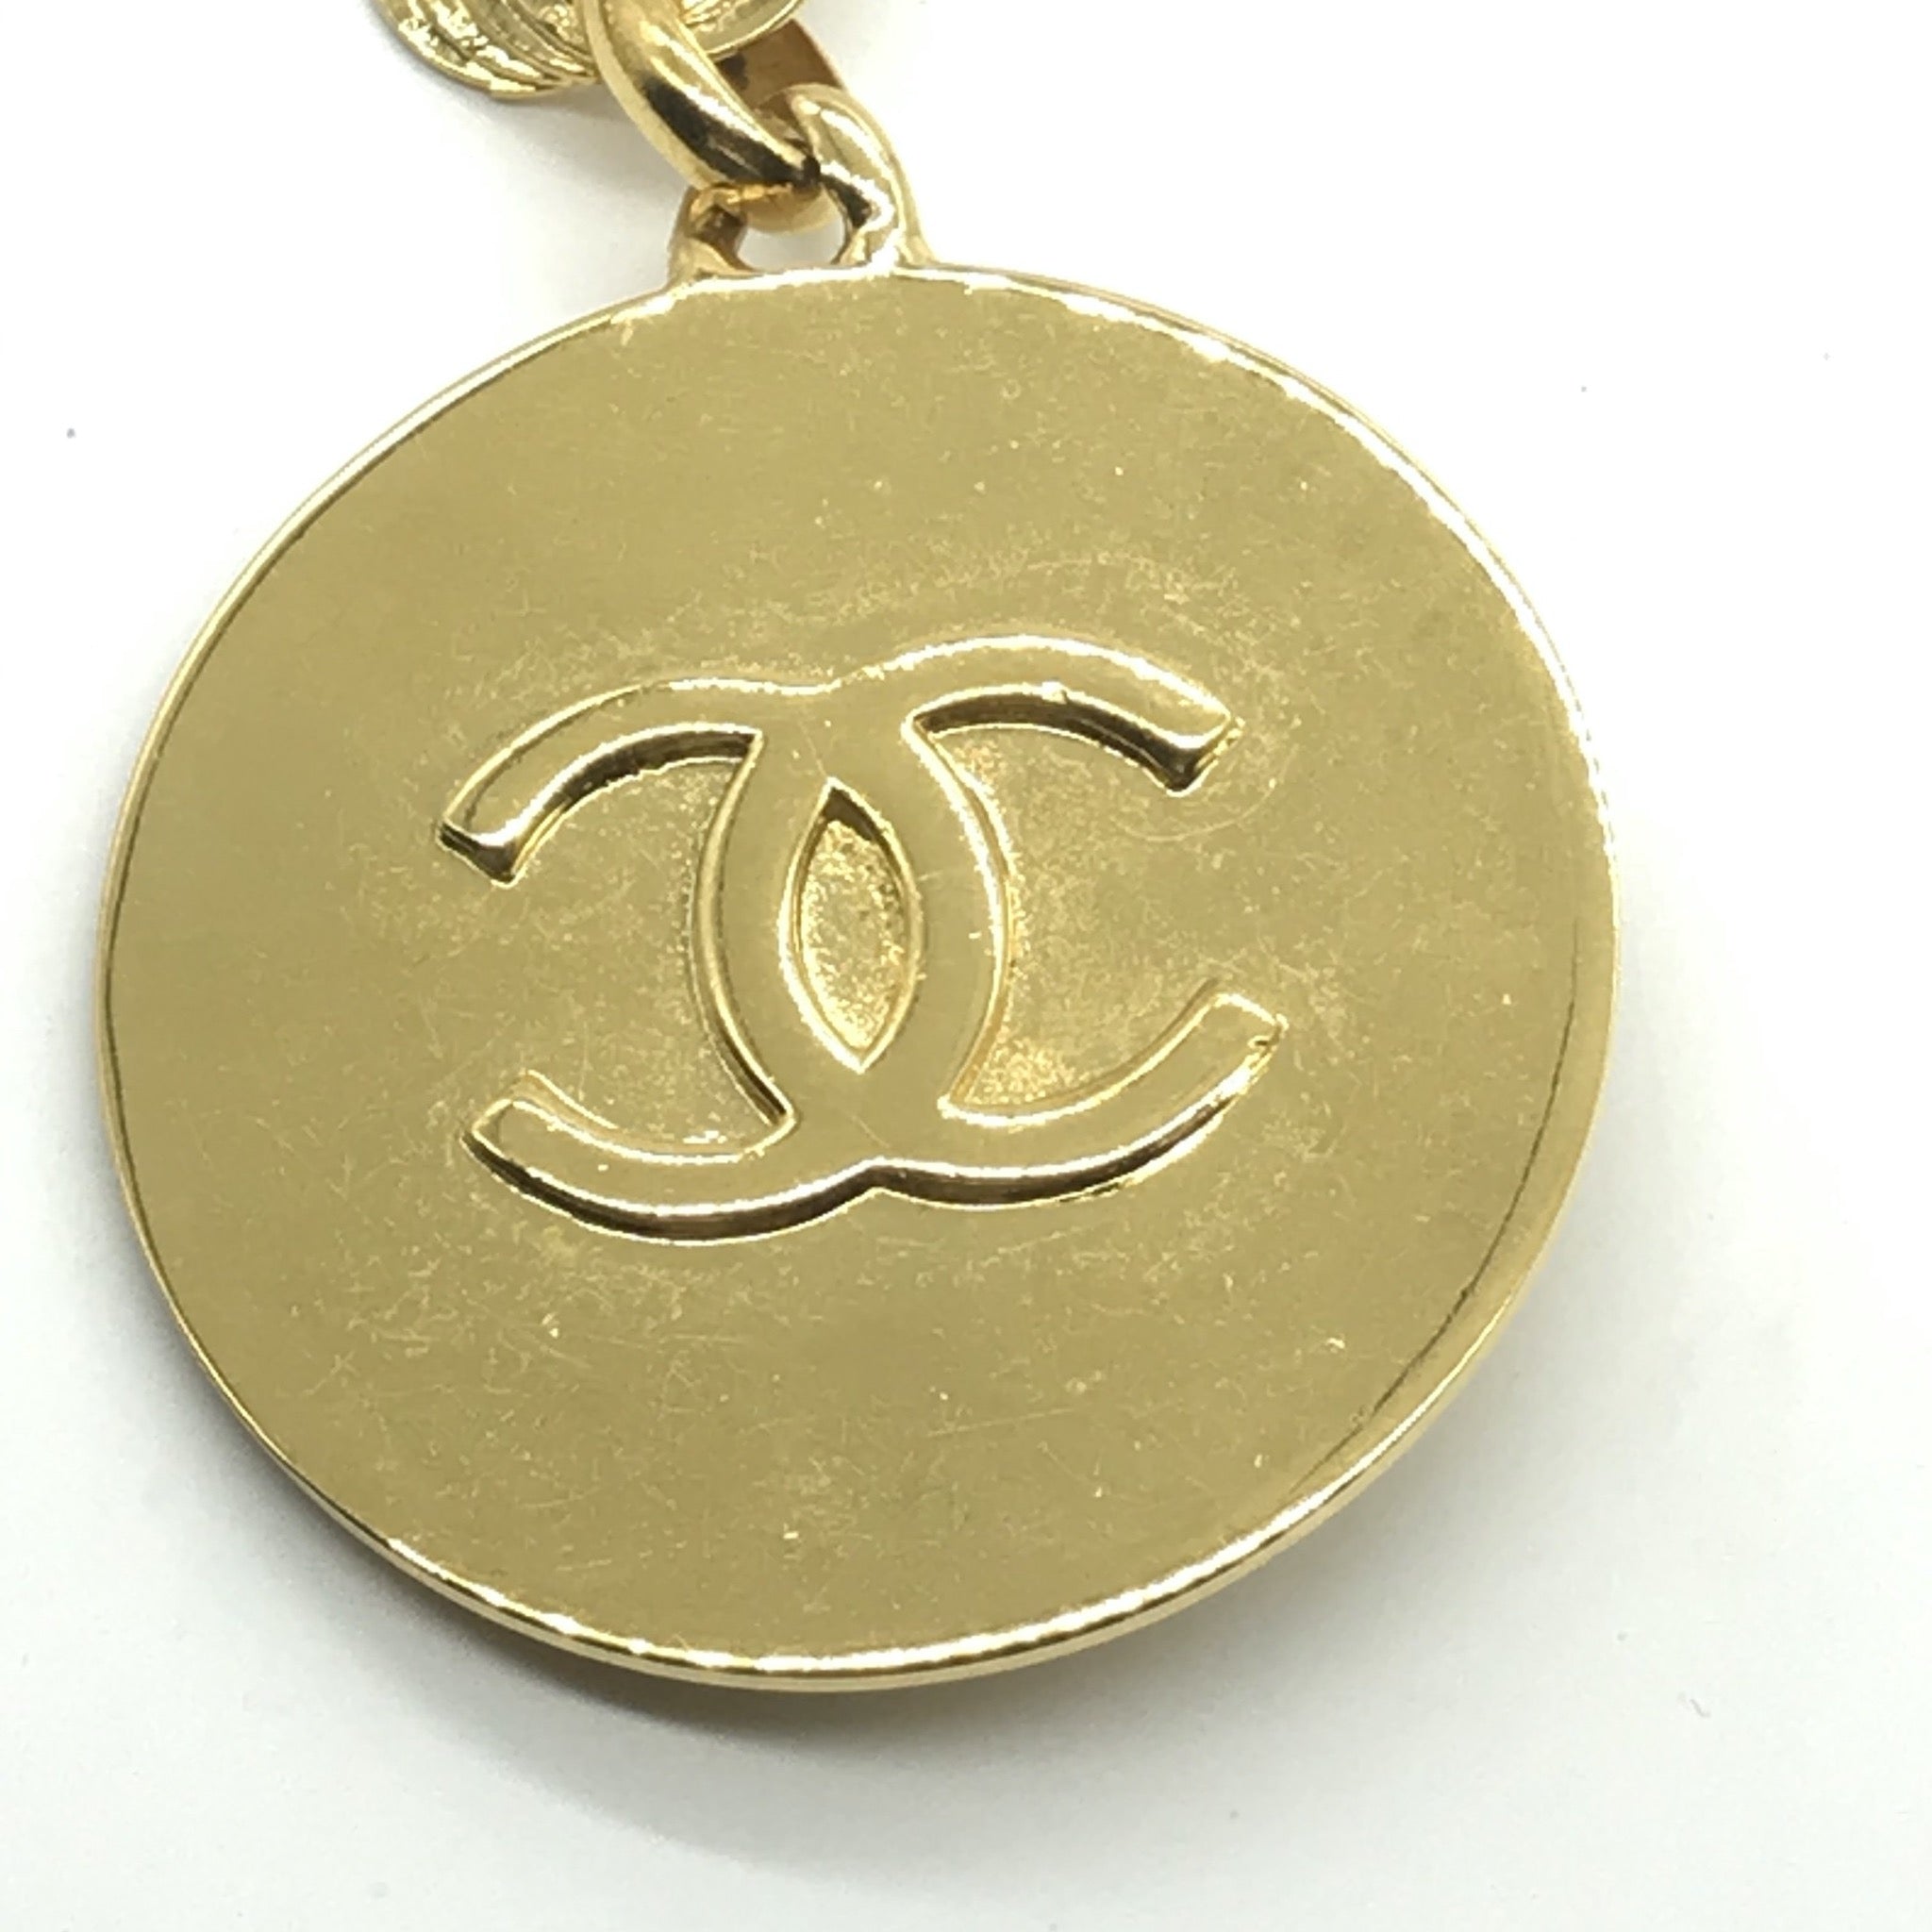 chanel star pendant necklace